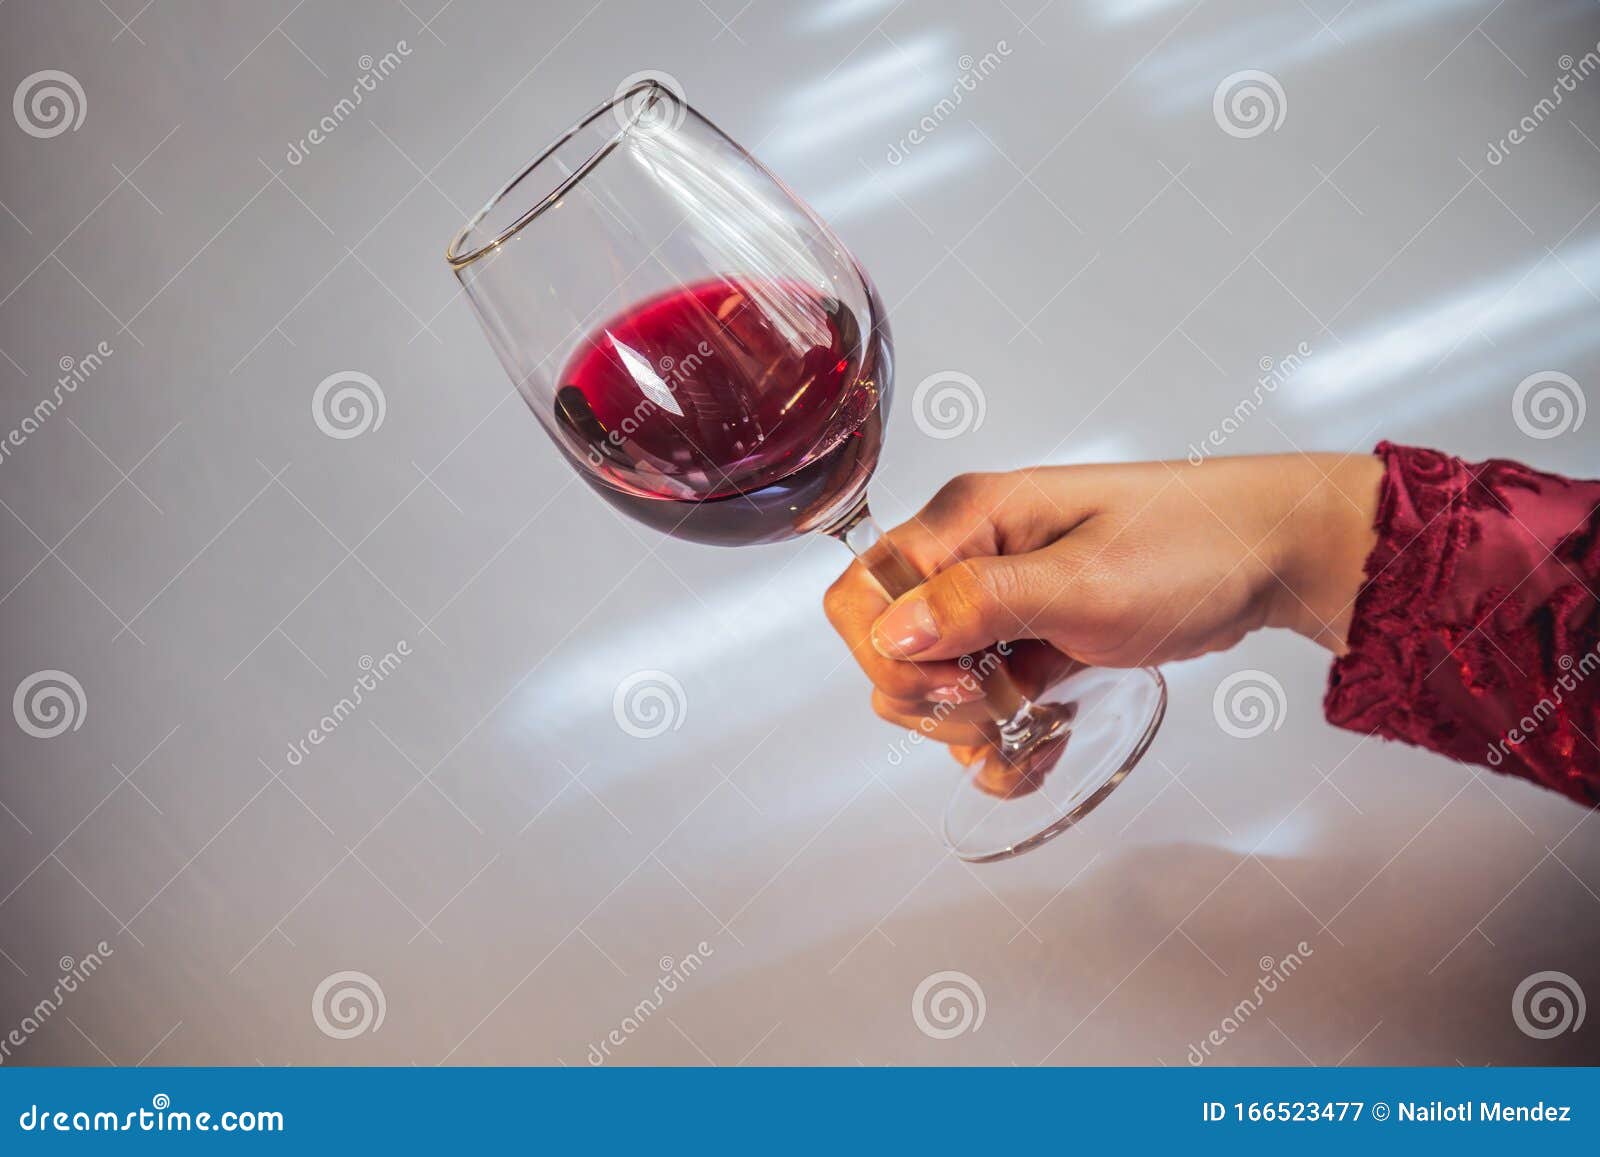 glass of red wine held by a woman& x27;s hand on white background